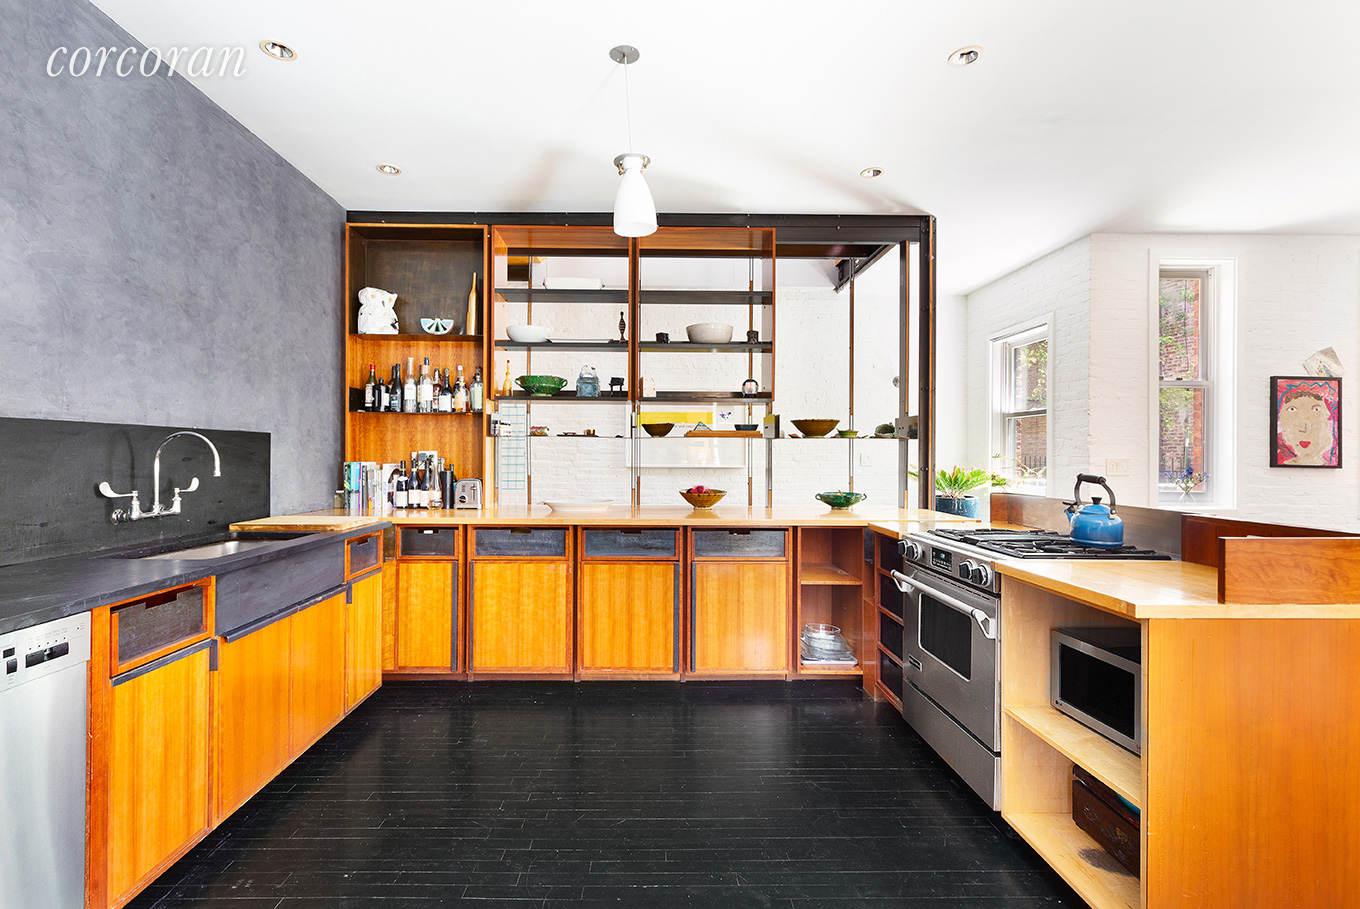 The Brooklyn carriage house has midcentury style teak cabinetry in the kitchen with modern stainless steel appliances.